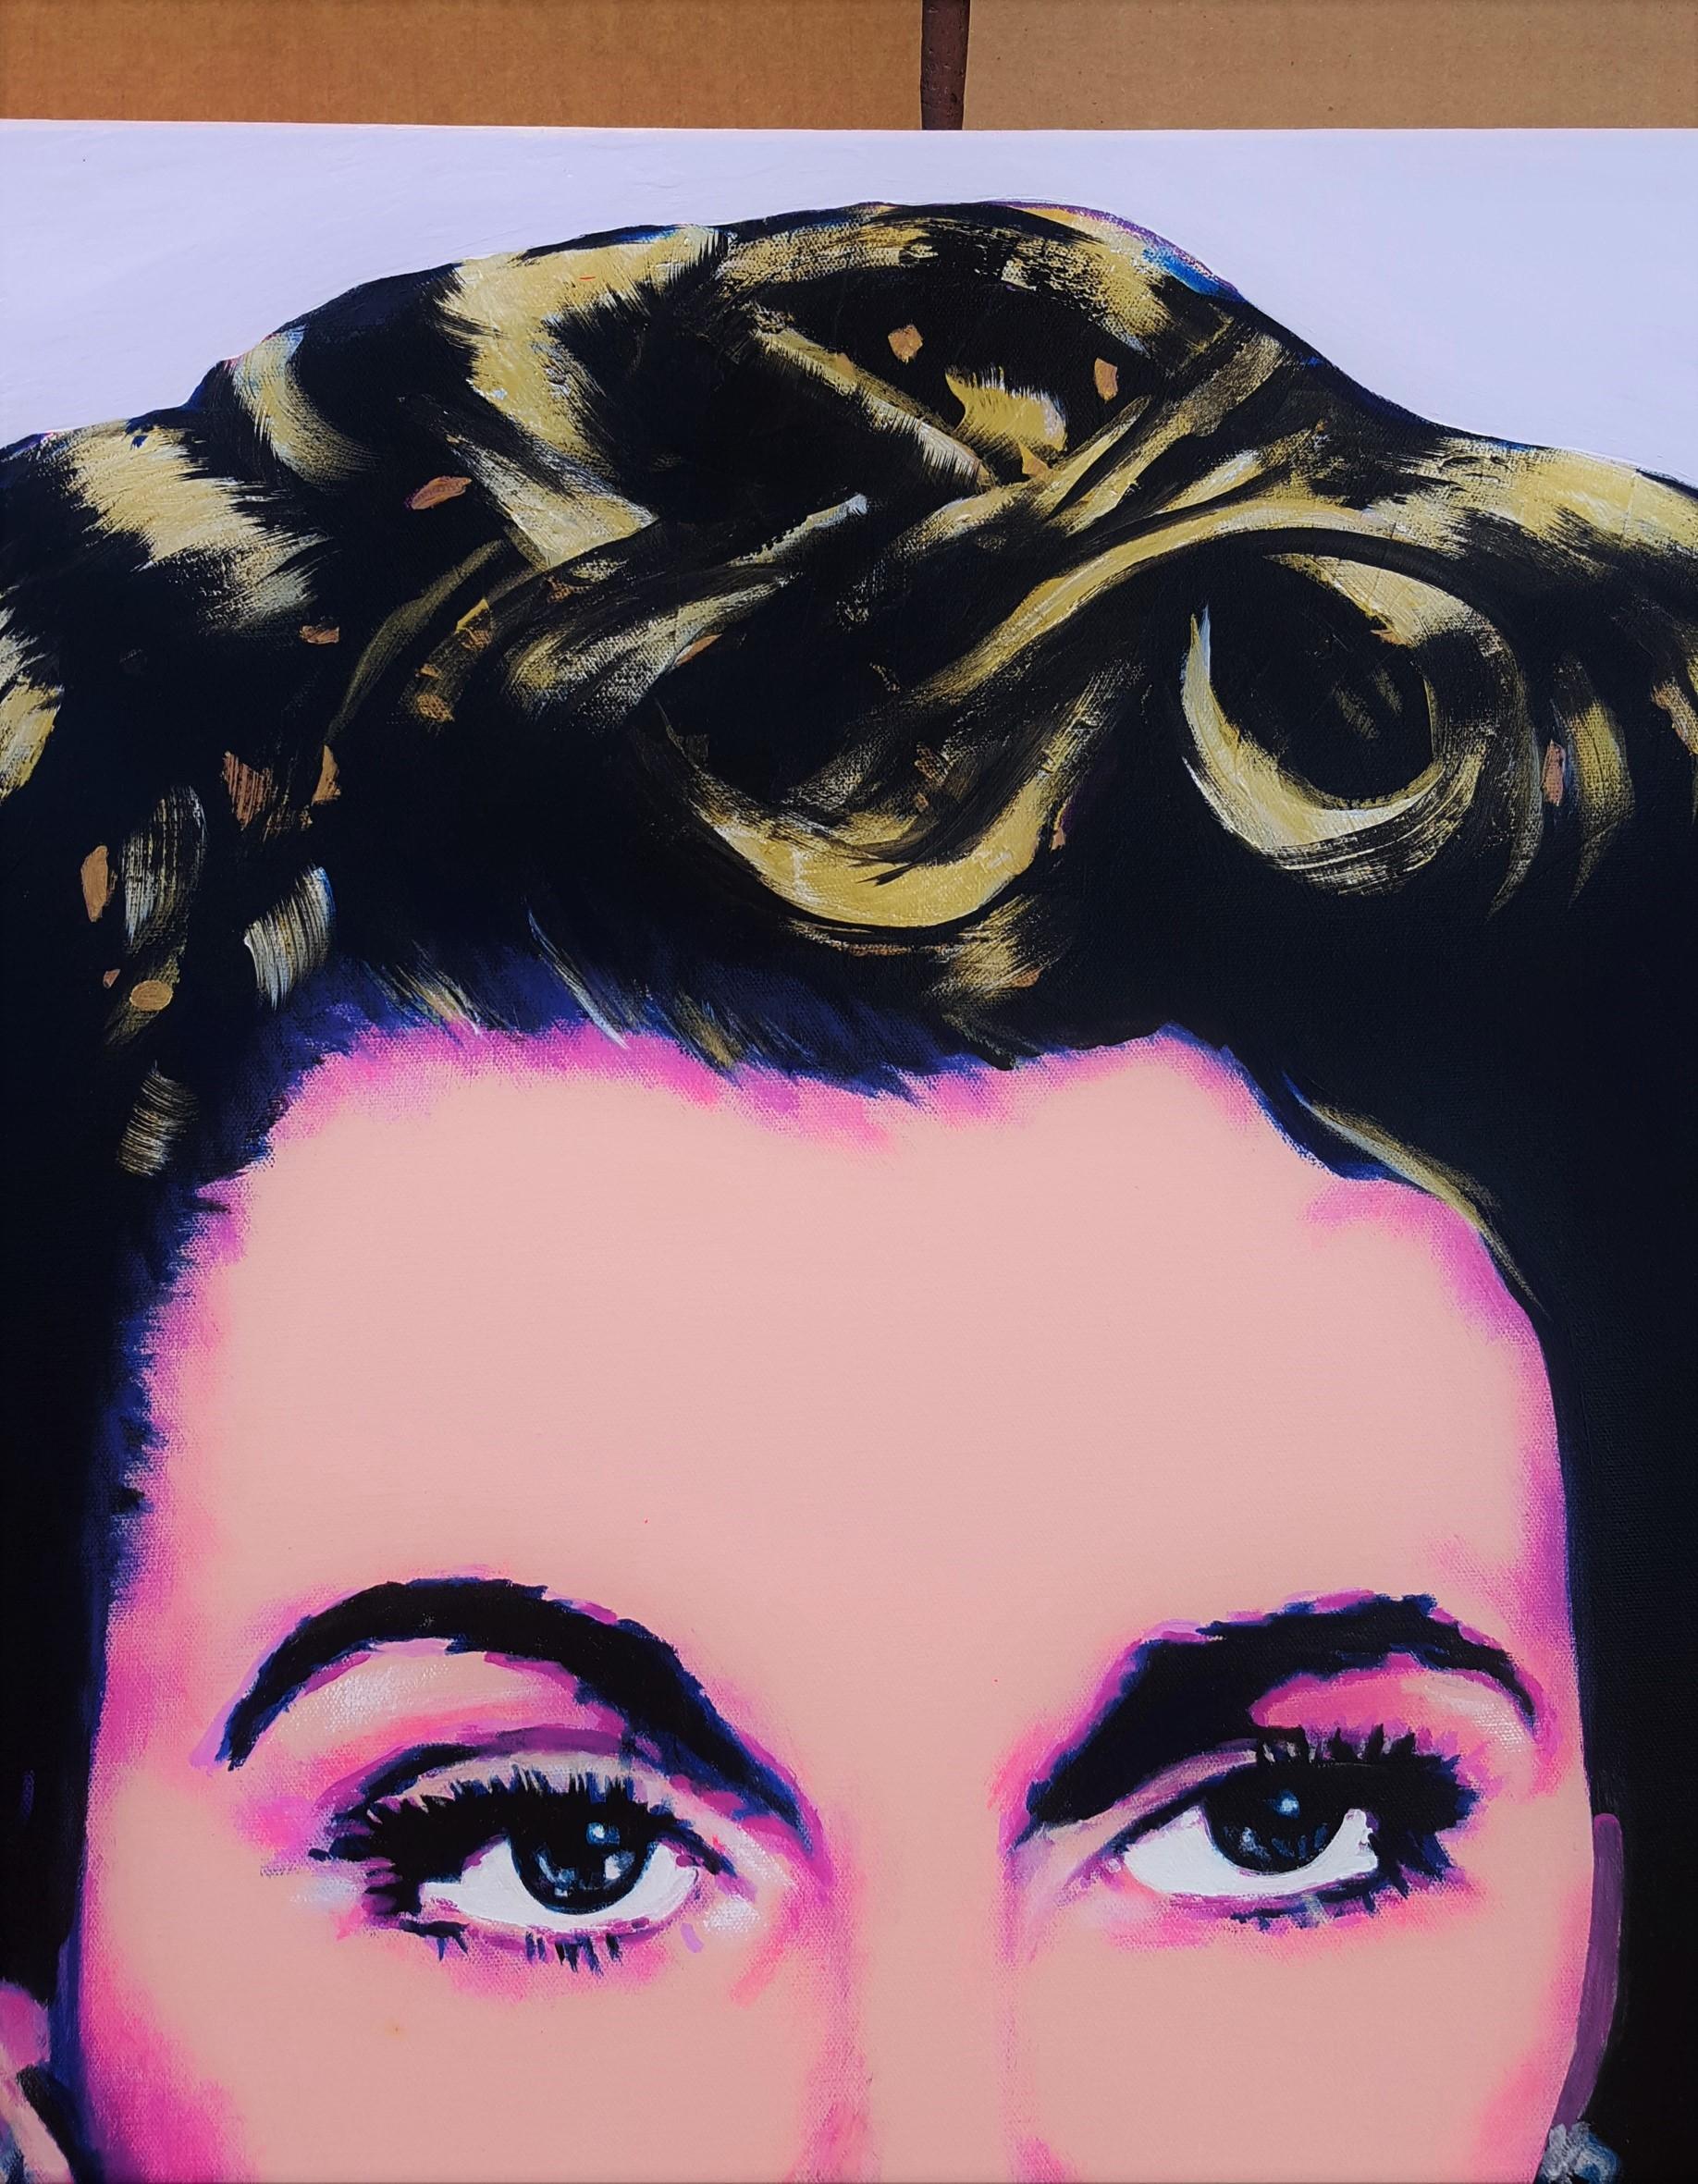 Scarlett O'Hara Icon (Vivien Leigh) - Contemporary Painting by Jack Graves III